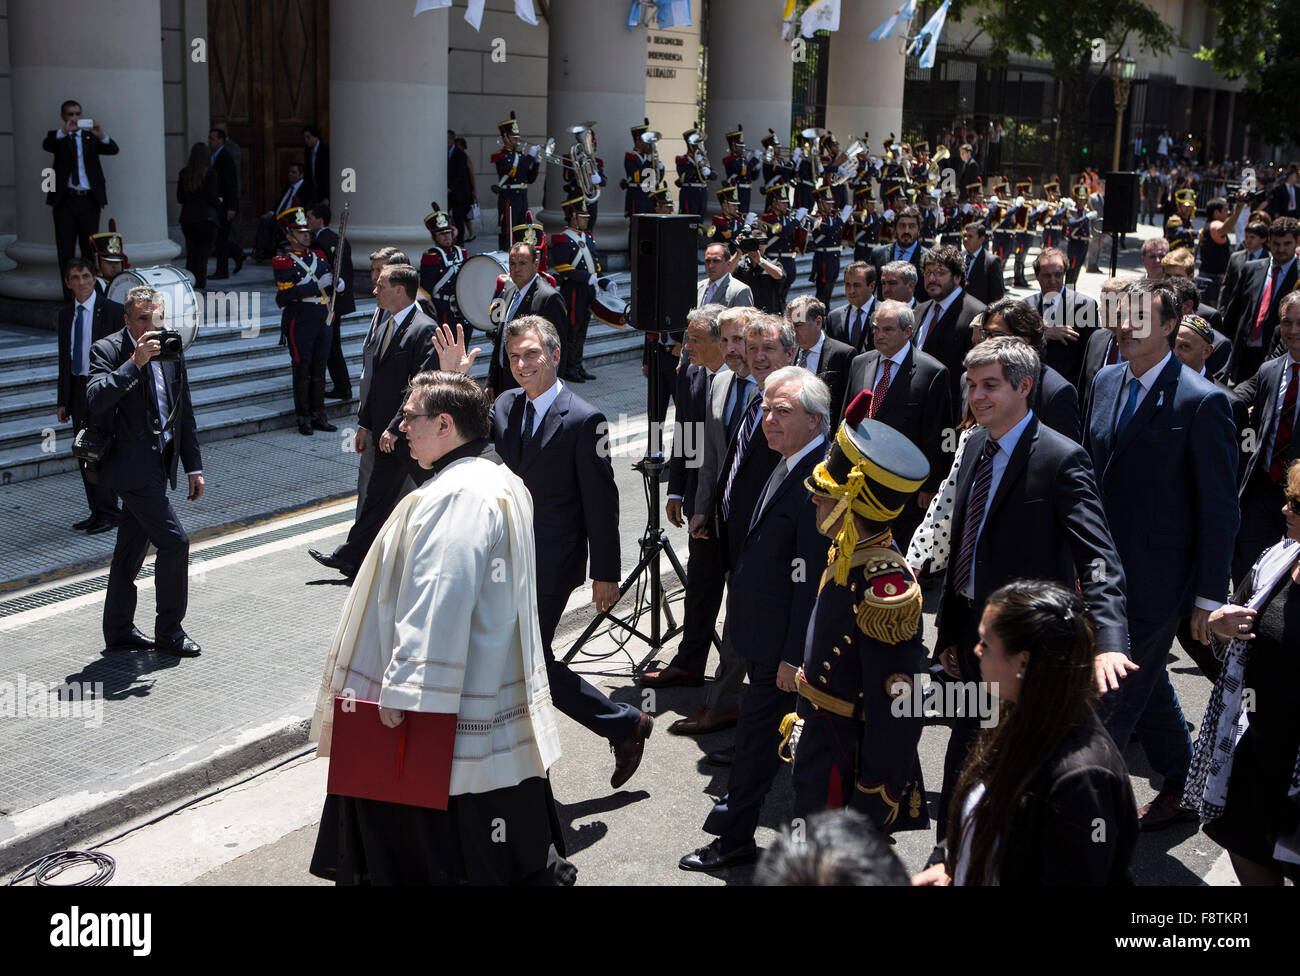 Buenos Aires, Argentina. 11th Dec, 2015. Argentina's President Mauricio Macri (C) waves while walking on May Avenue with his Cabinet to participate in the Tedeum at the Metropolitan Cathedral in Buenos Aires, capital of Argentina, Dec. 11, 2015. According to local press, Mauricio Macri Friday attended the traditional religious service at the Metropolital Cathedral, the day after his pesidential inauguration. Credit:  Martin Zabala/Xinhua/Alamy Live News Stock Photo